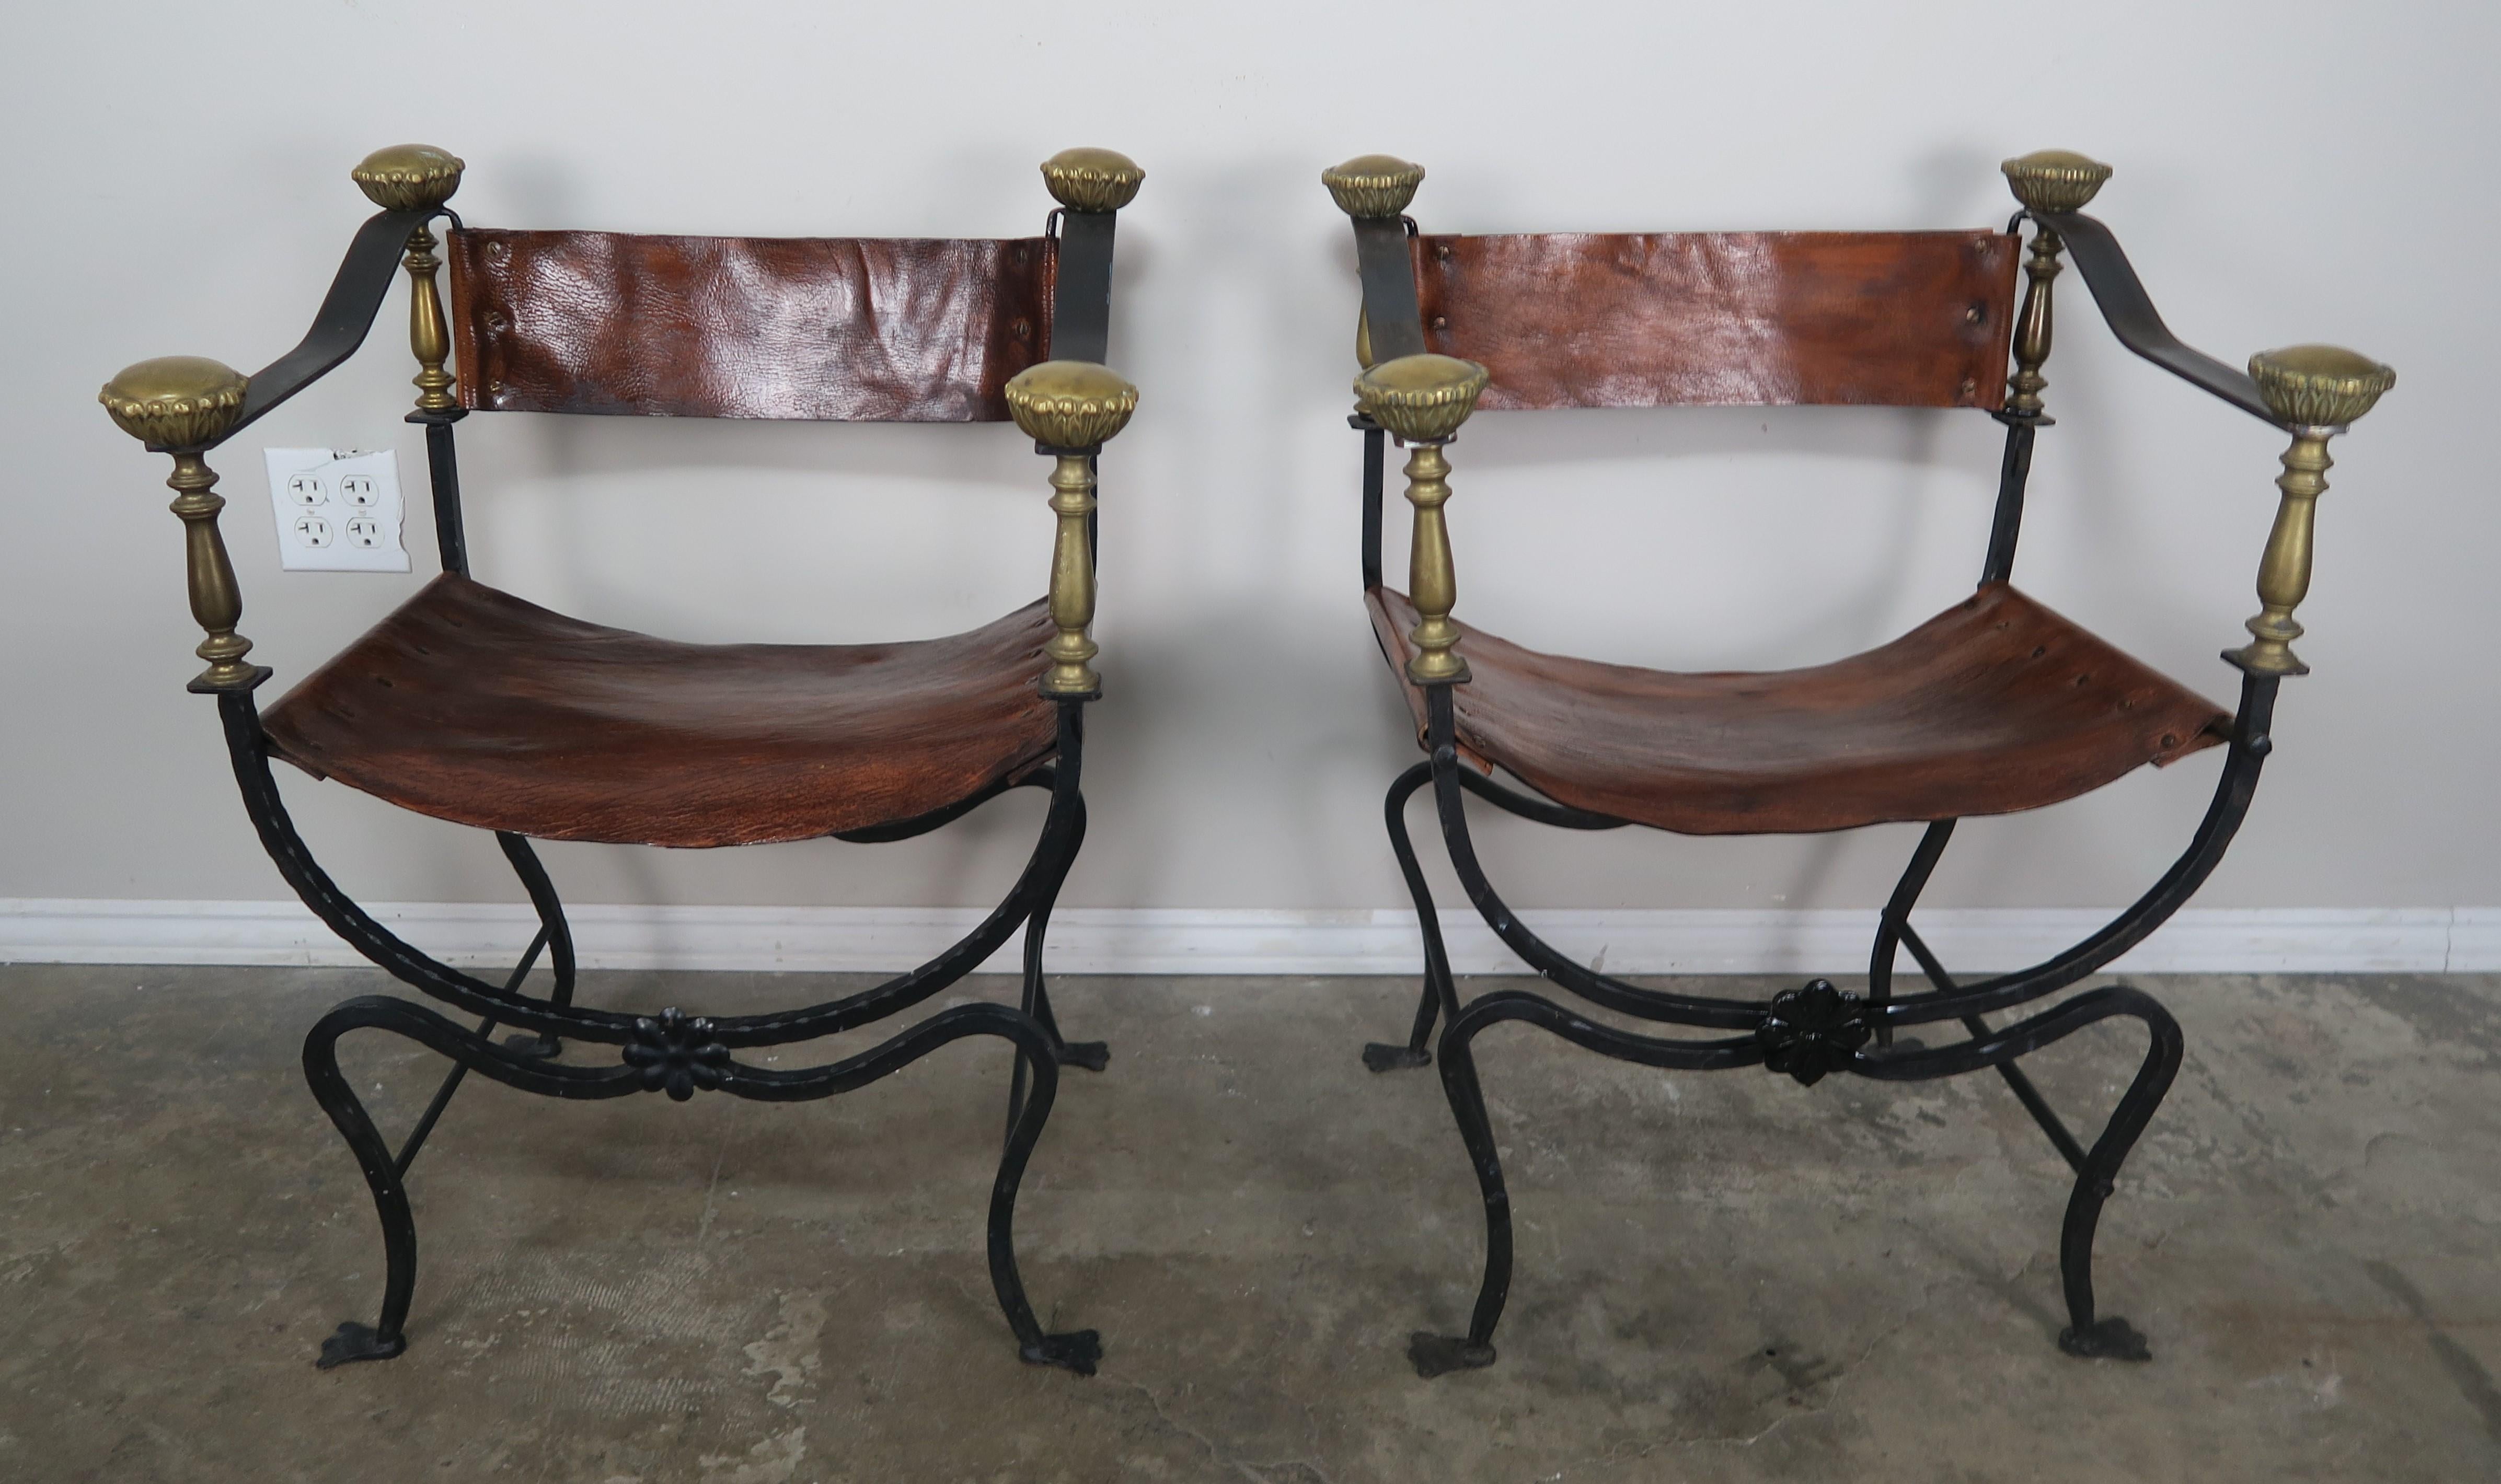 Pair of Spanish wrought iron armchairs with bronze details and leather upholstery. 
Seat height 17